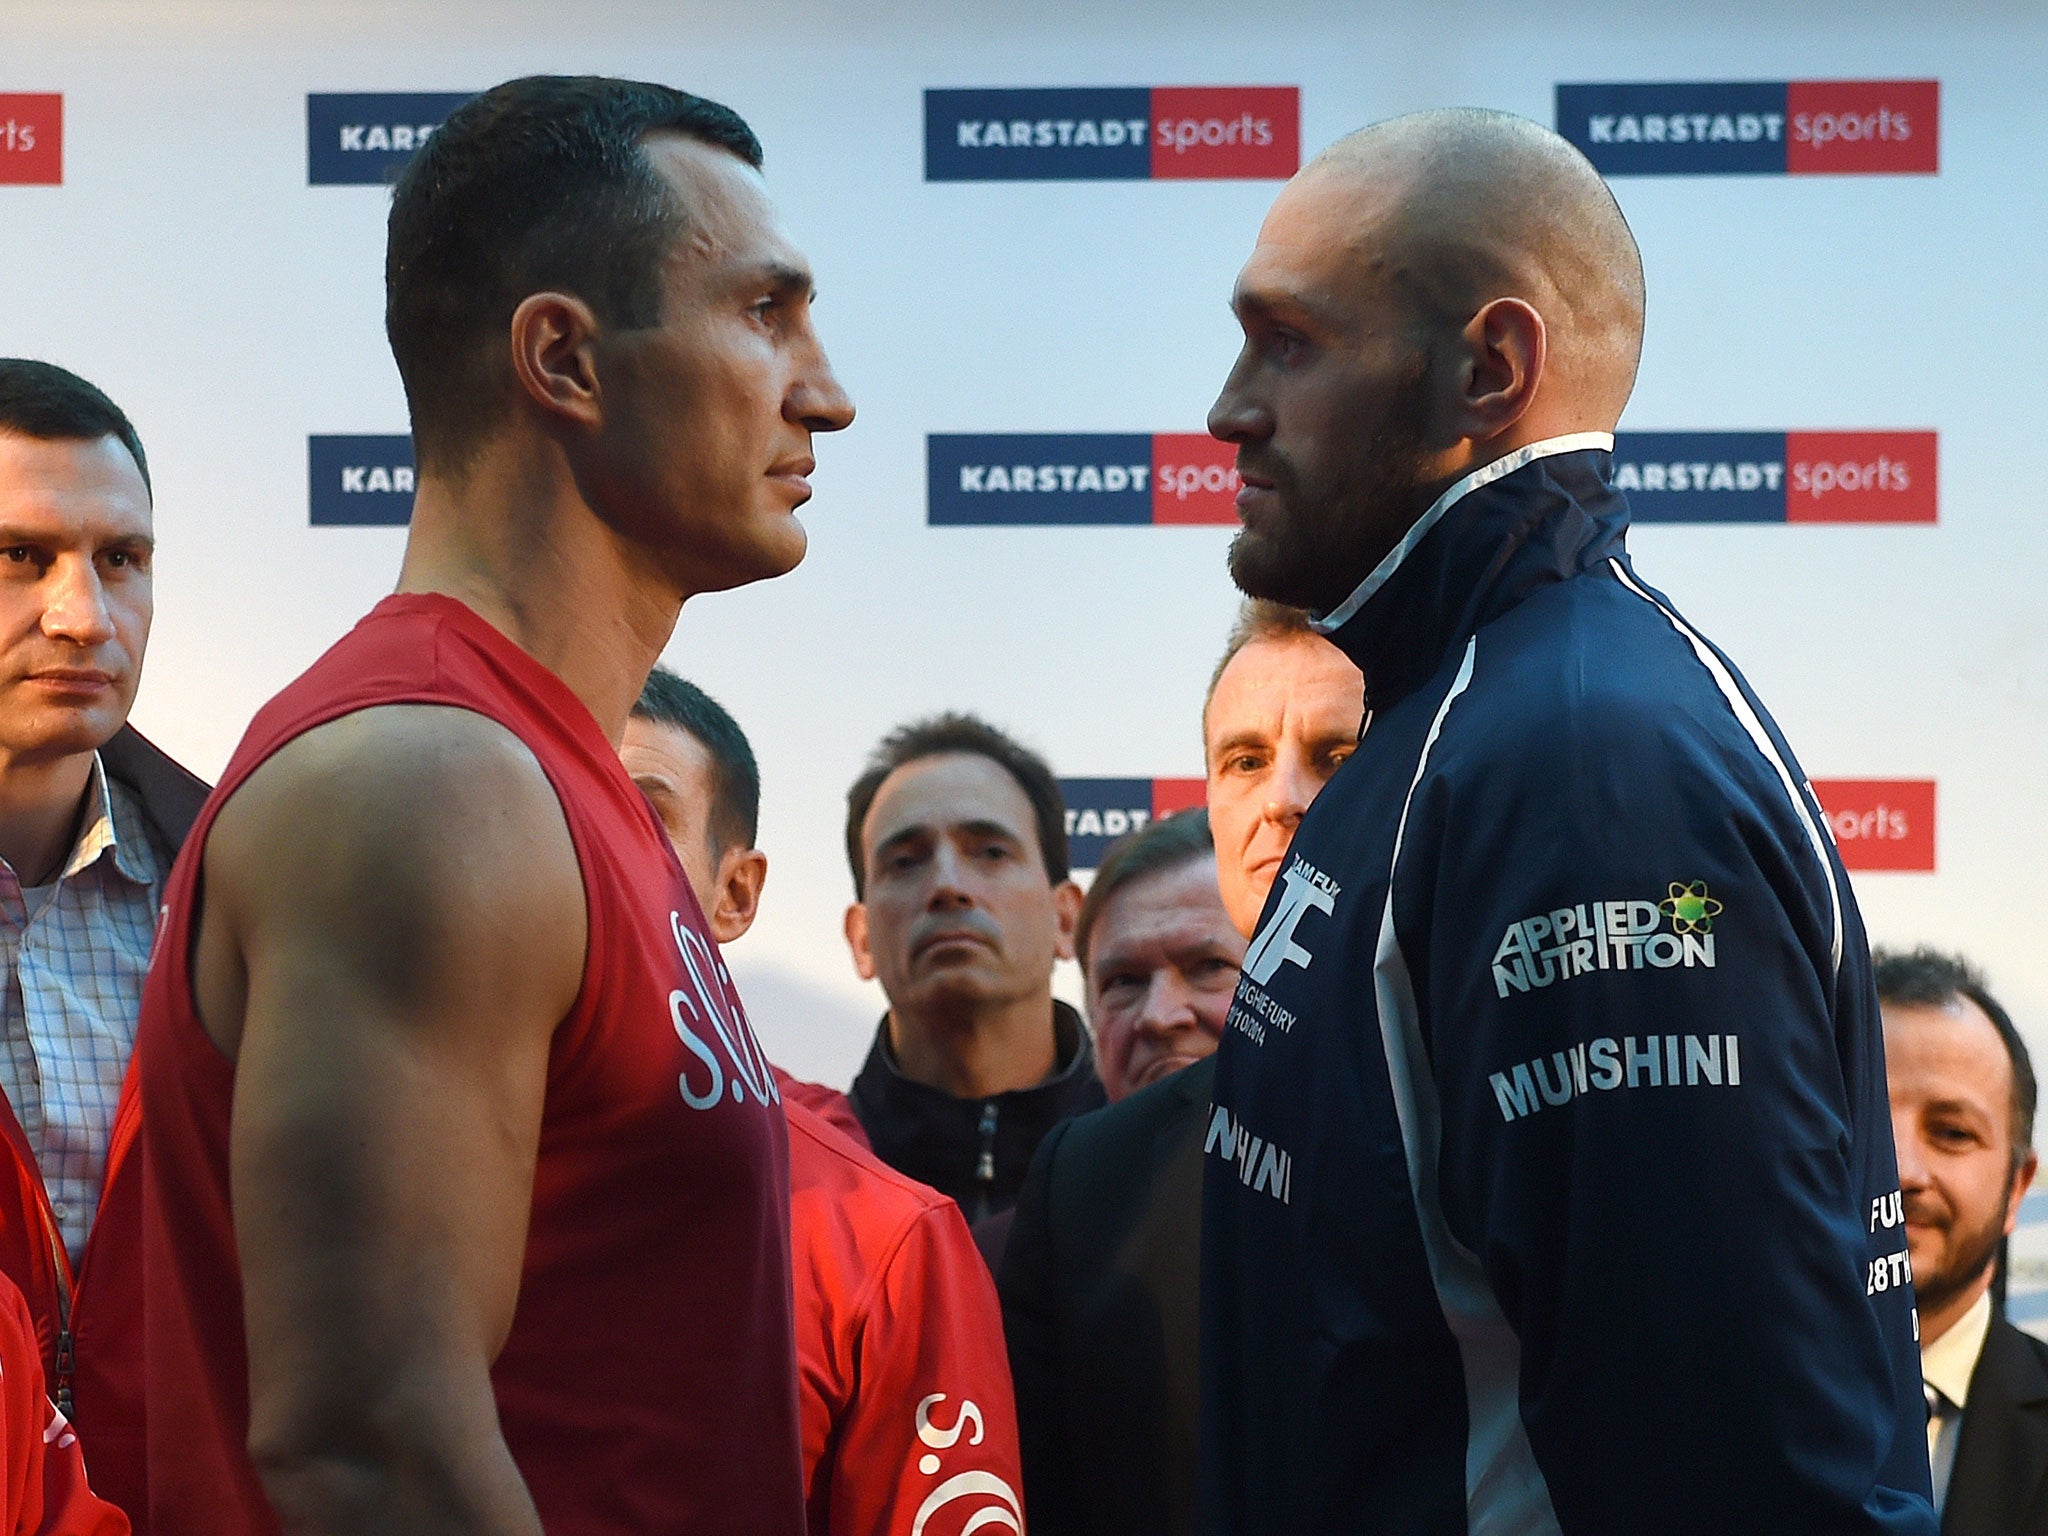 Tyson Fury and Wladimir Klitschko go head to head at their press conference this summer